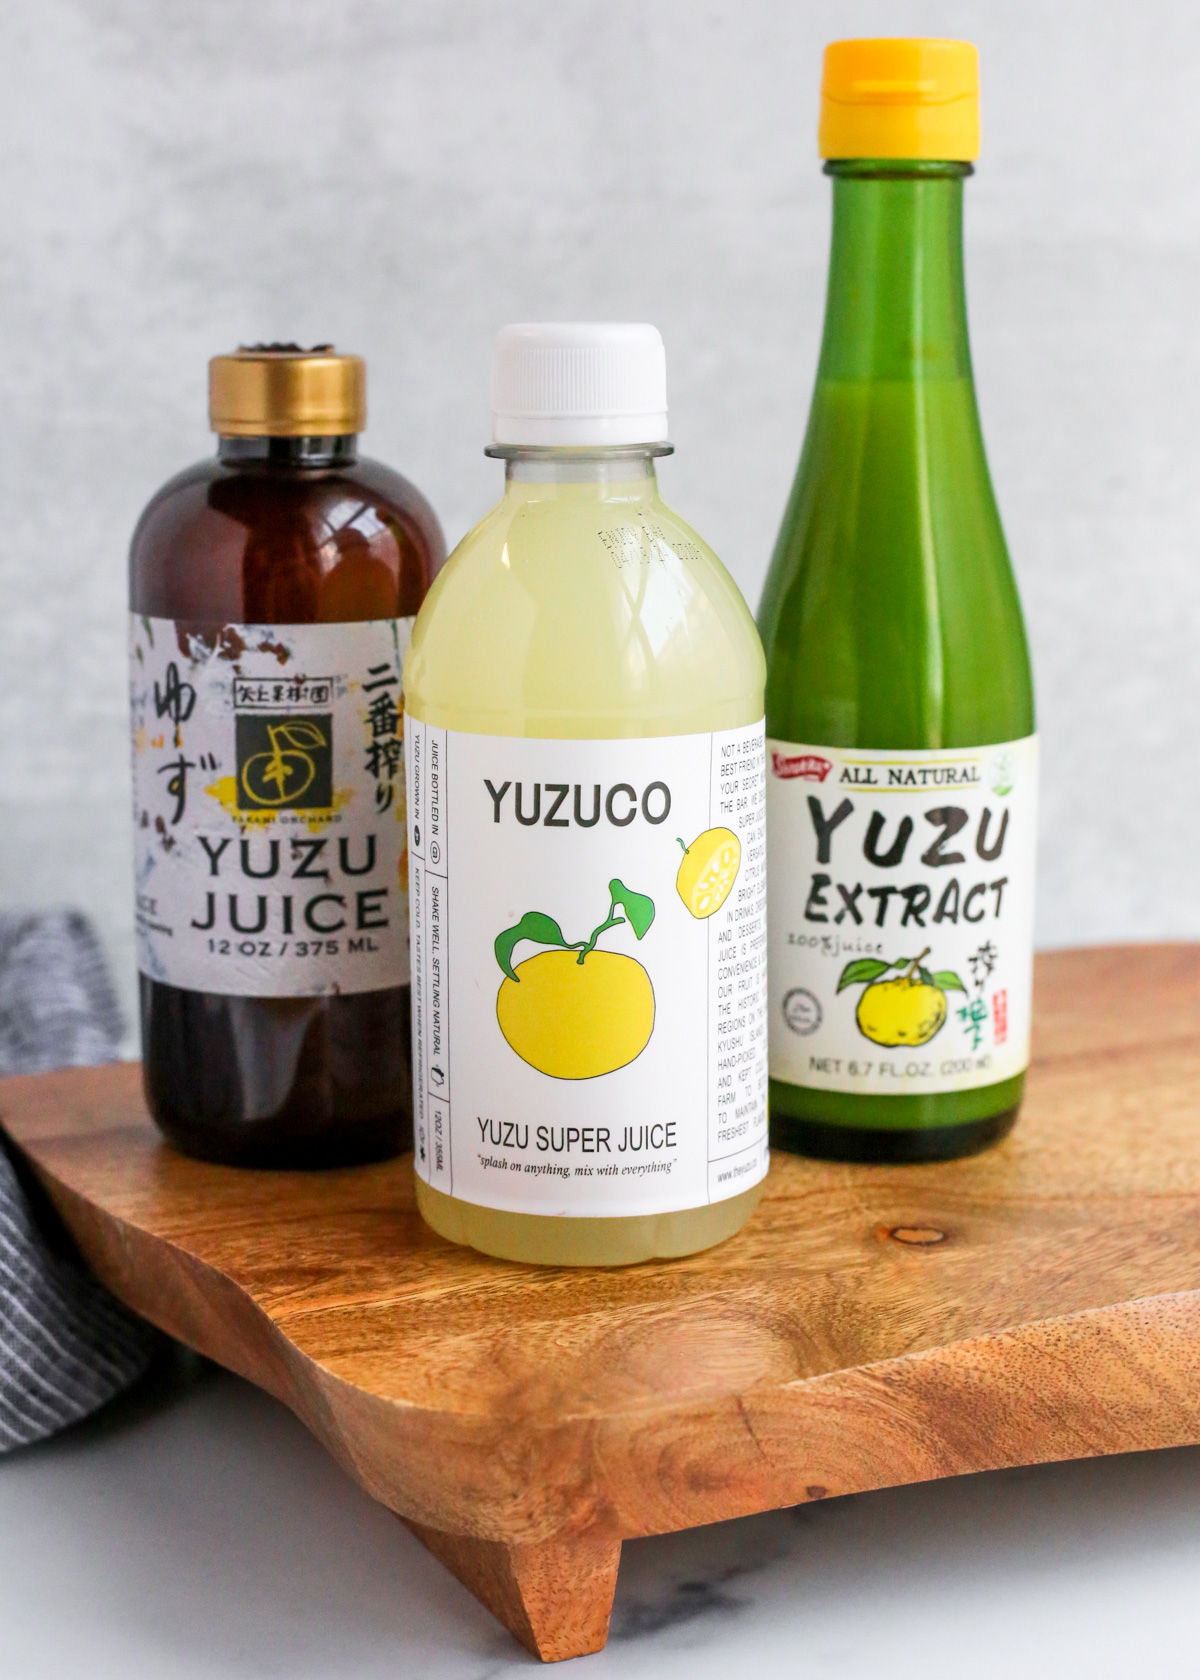 A wooden serving board displays three bottles labeled as yuzu juice, yuzu super juice, and all-natural yuzu extract